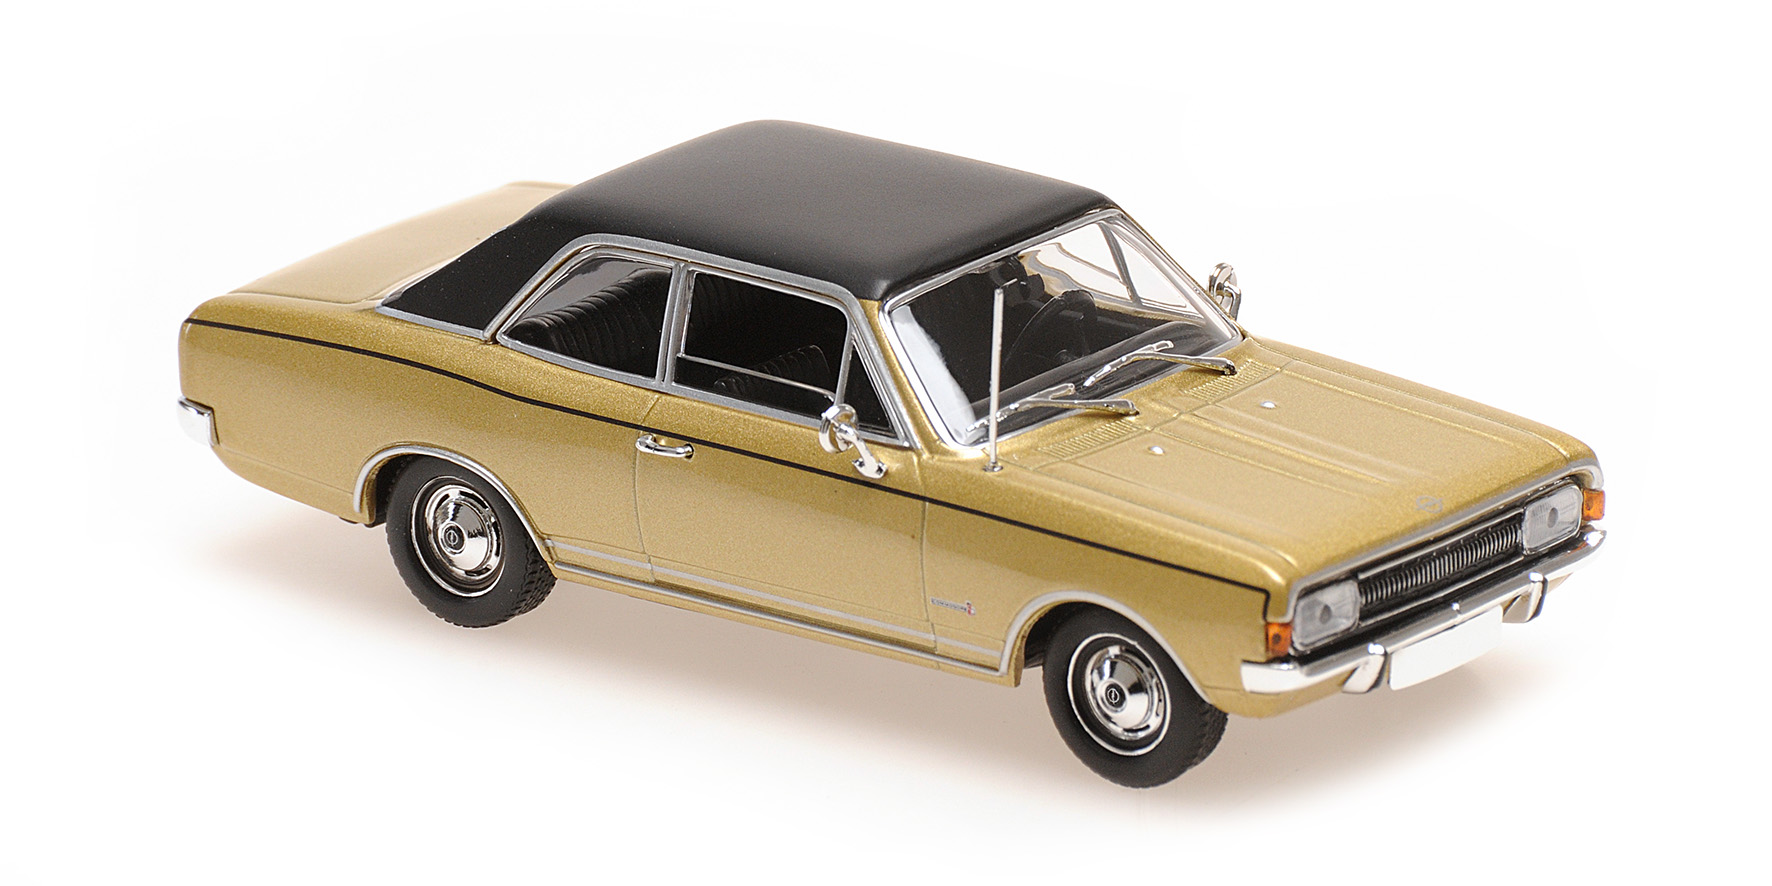 Opel Commodore A`1970 gold gold metallic 1:43 Die Cast